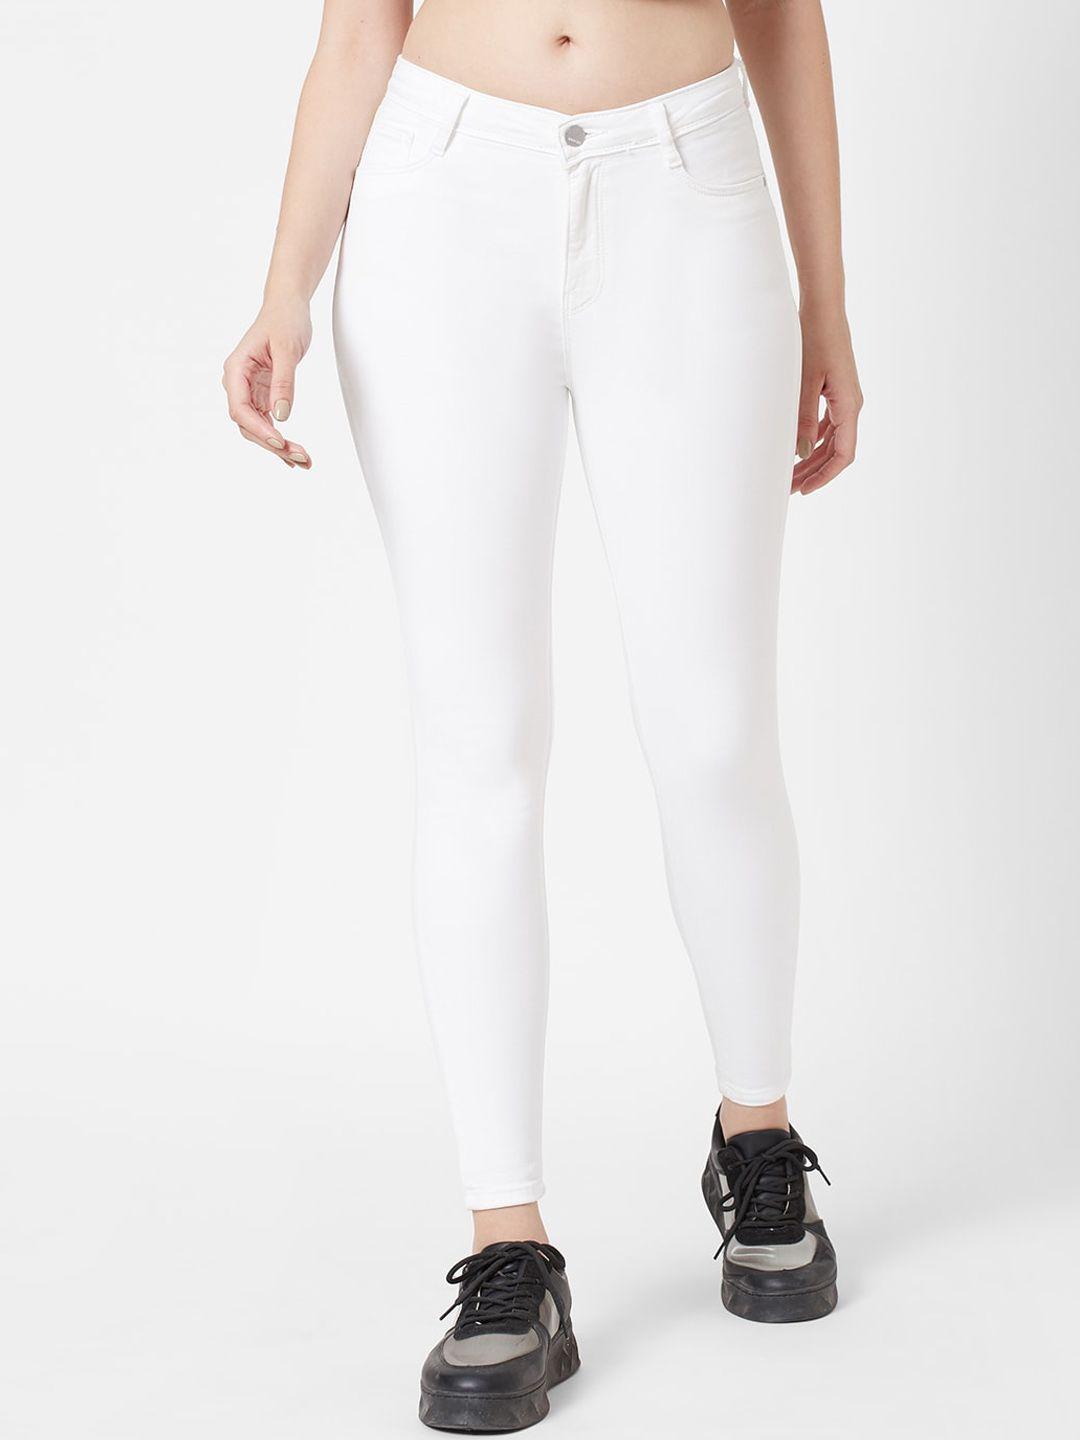 kraus jeans women white skinny fit high-rise jeans